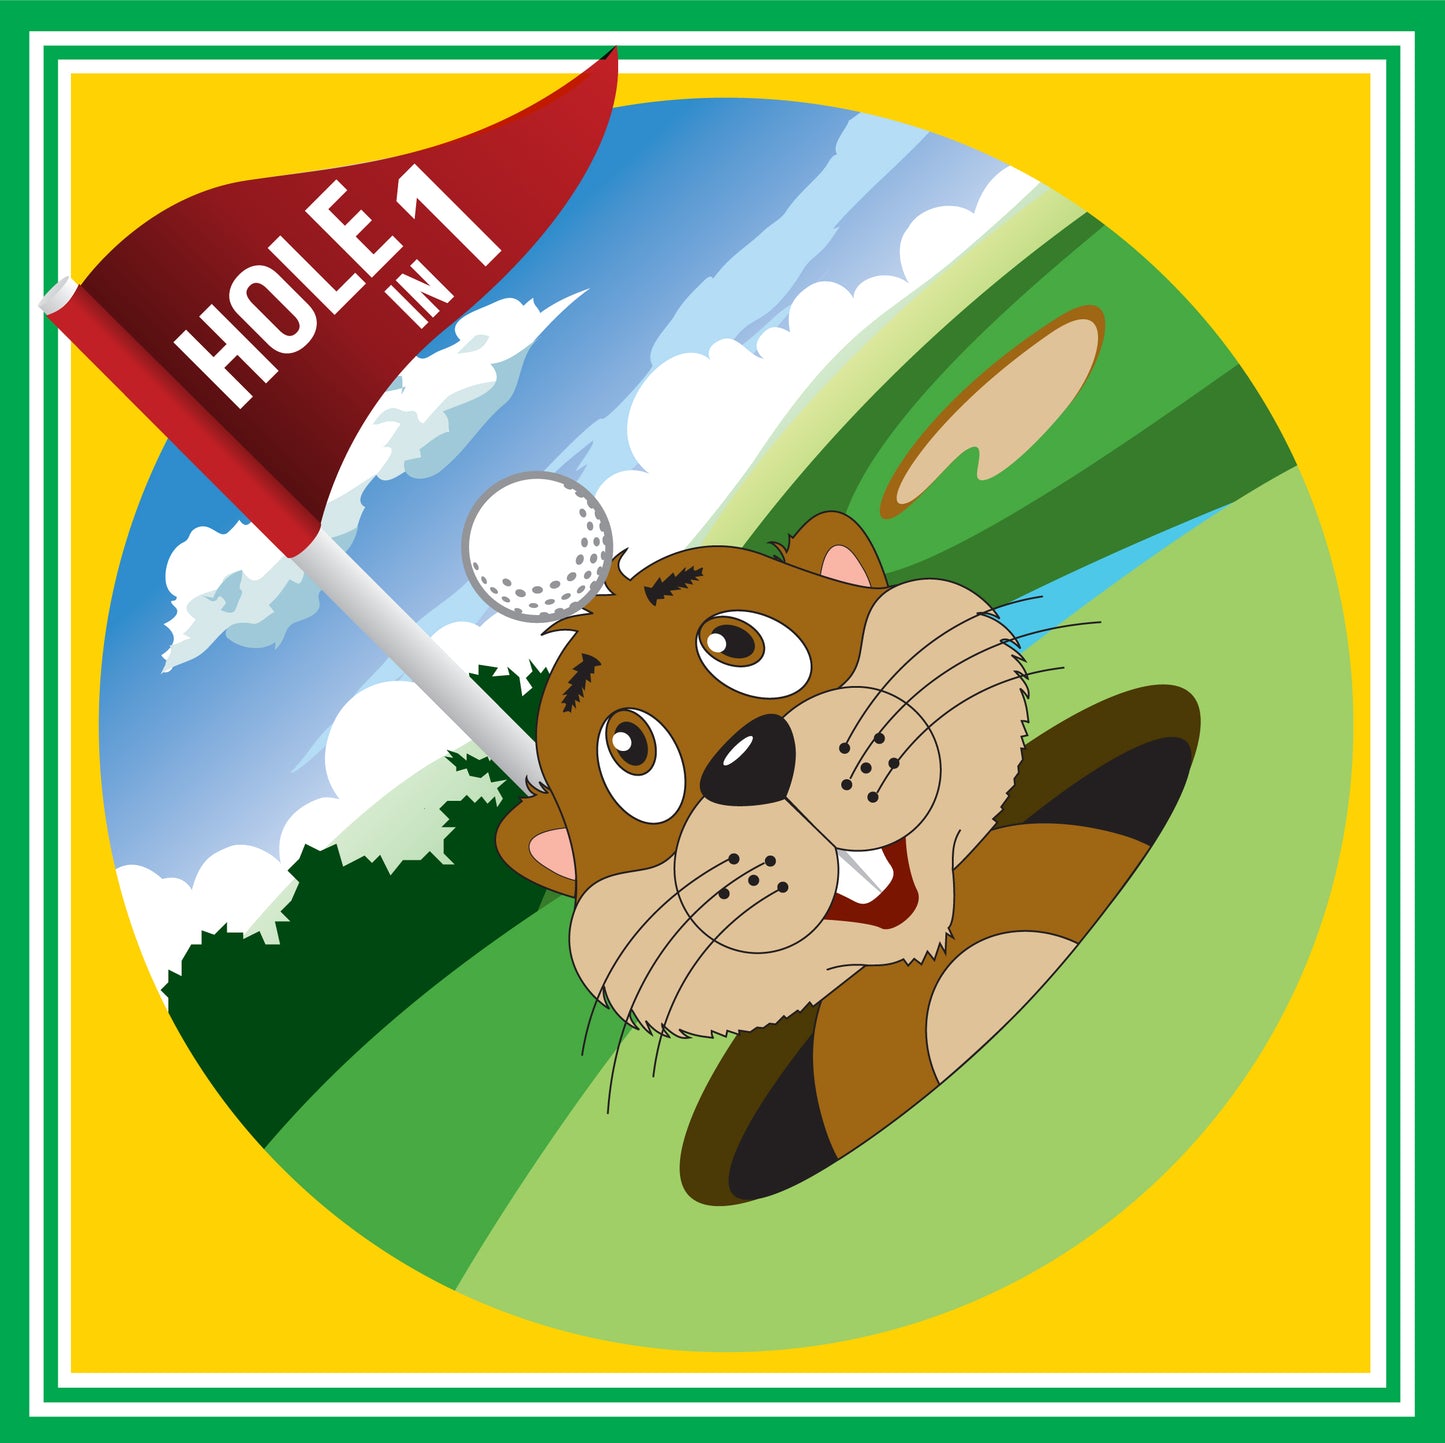 THE GOPHER HOLE-IN-ONE KIT